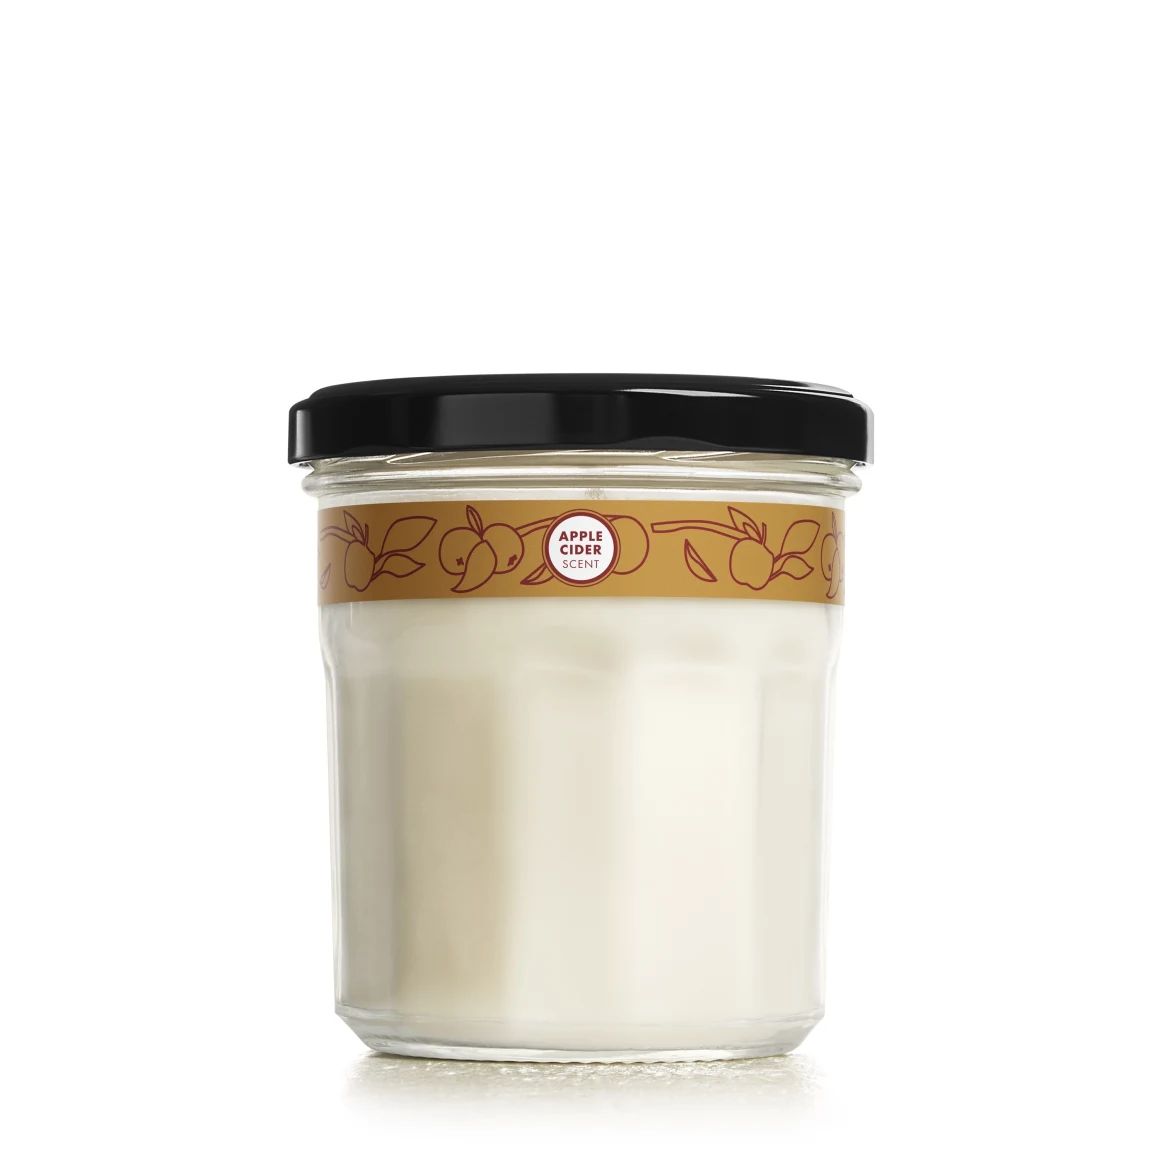 Mrs. Meyer's Soy Glass Jar Candle | Grove